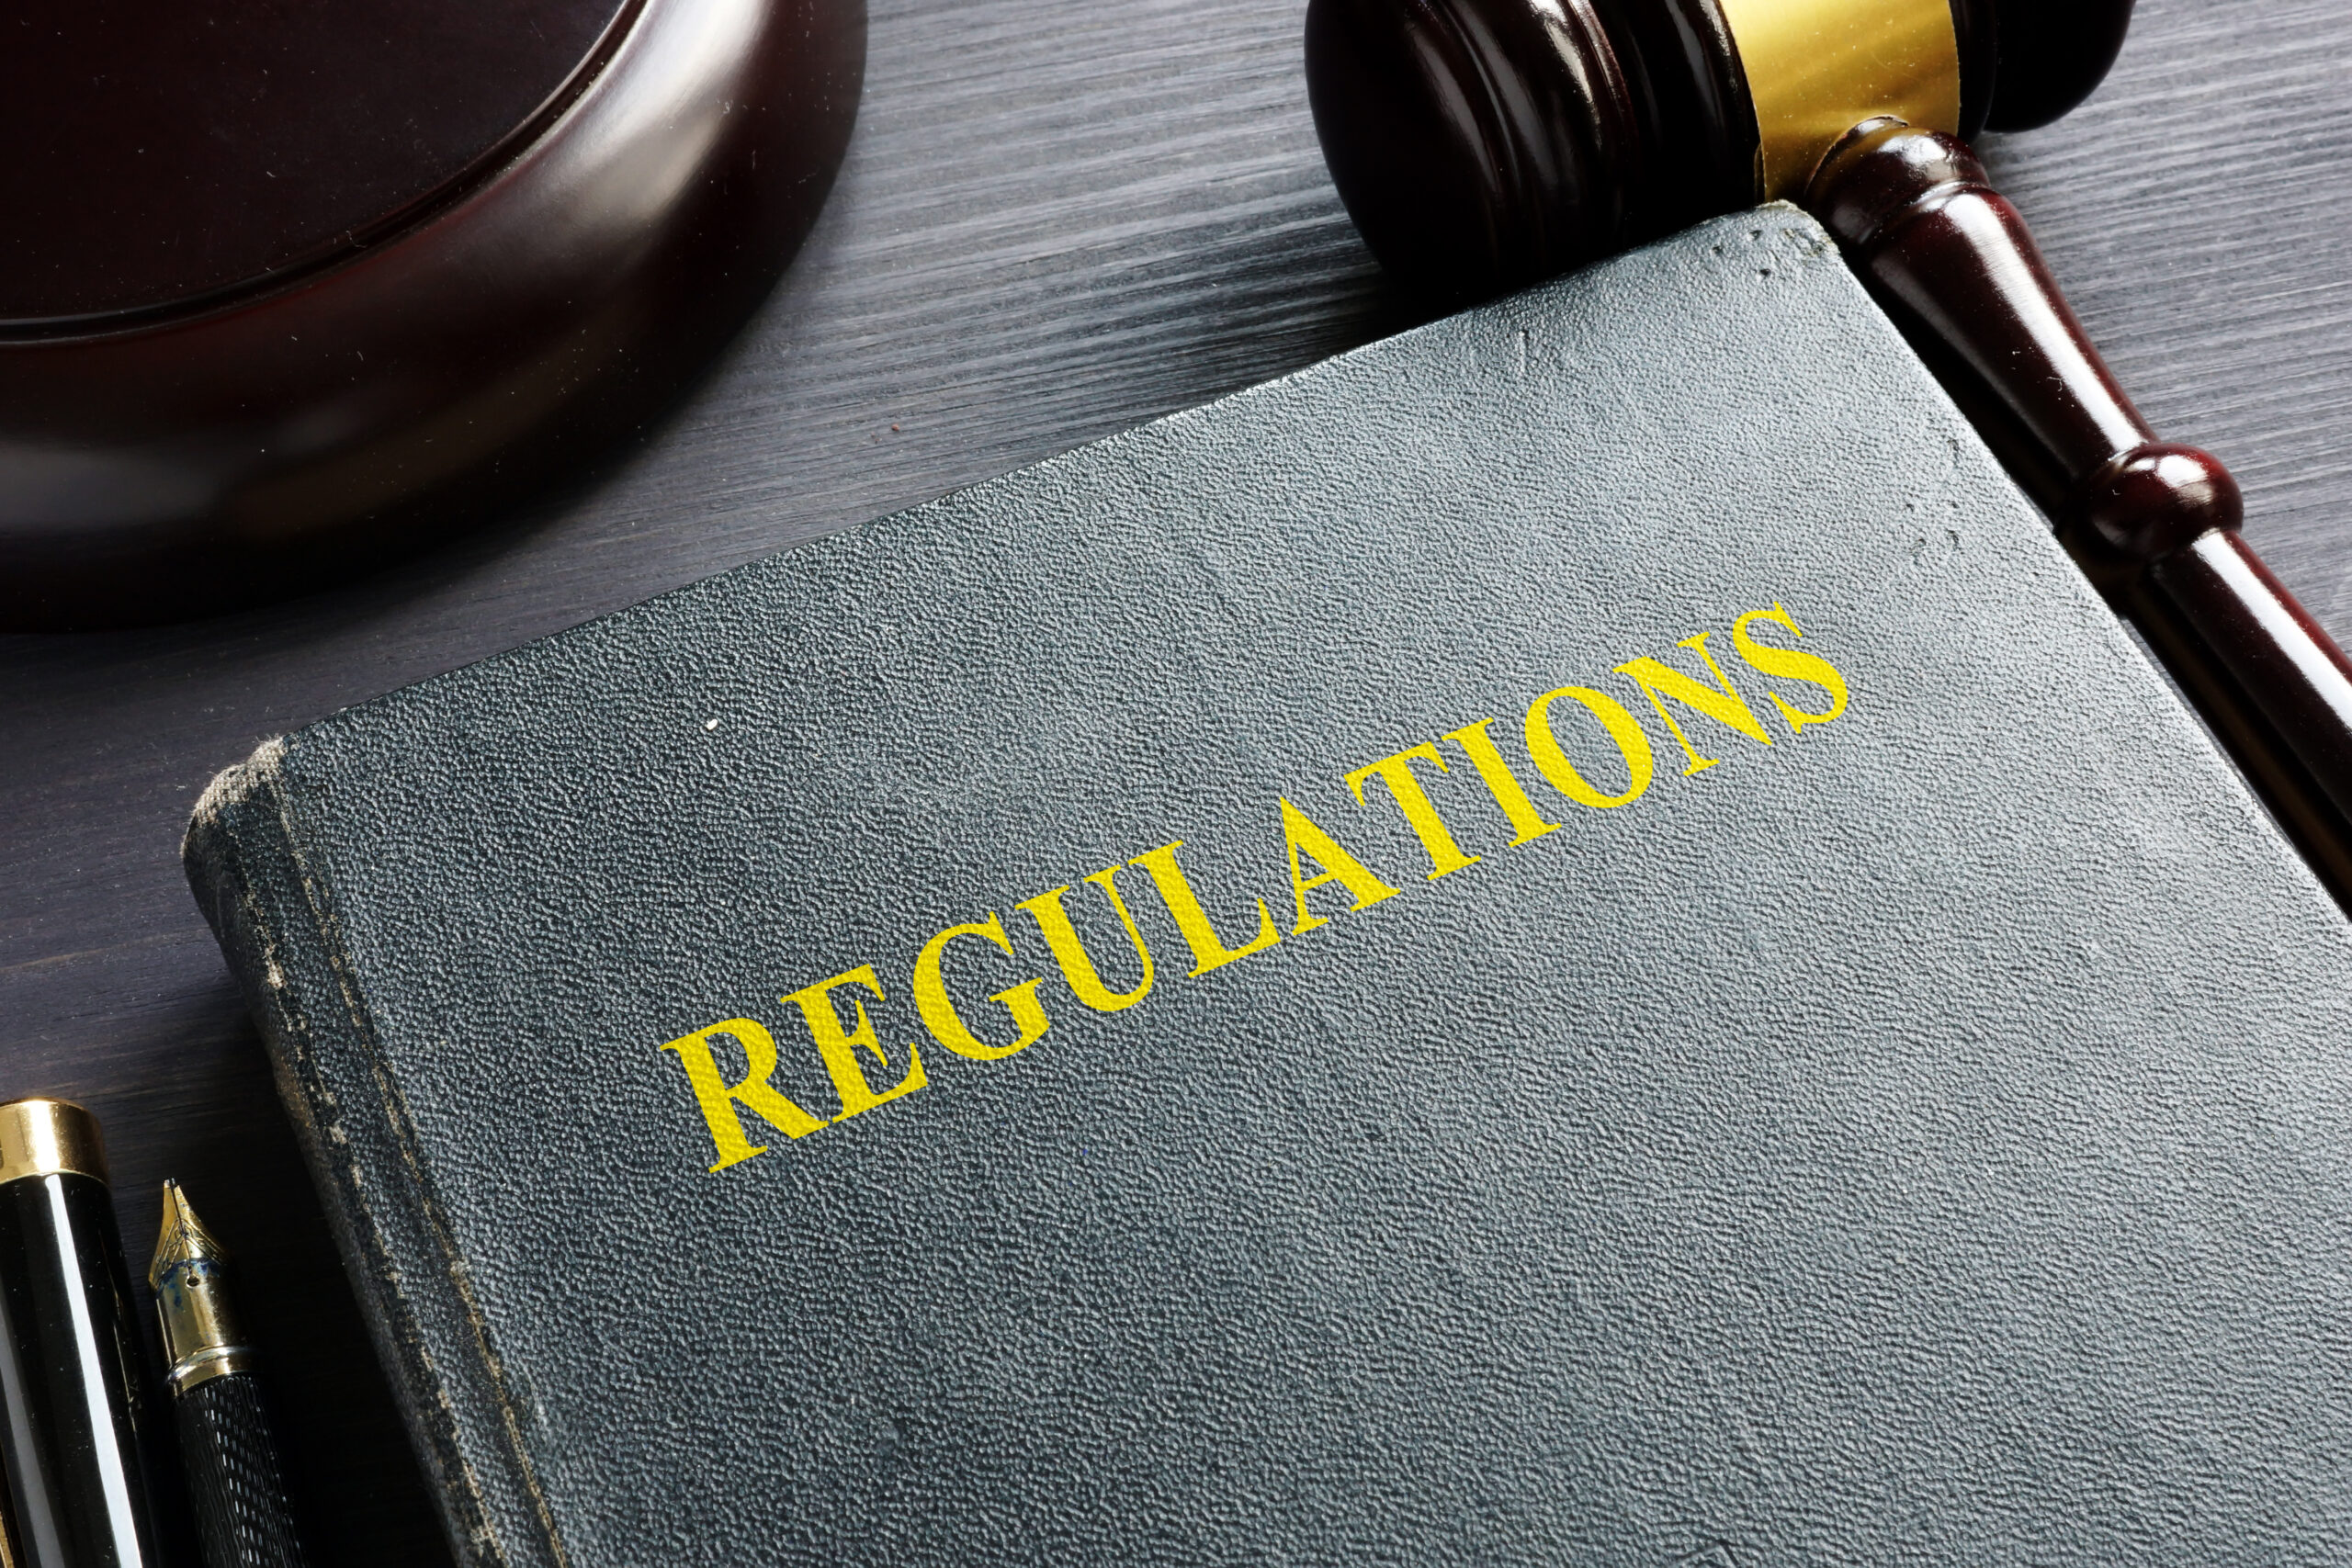 "Regulations" embossed on a book with gavel in background.